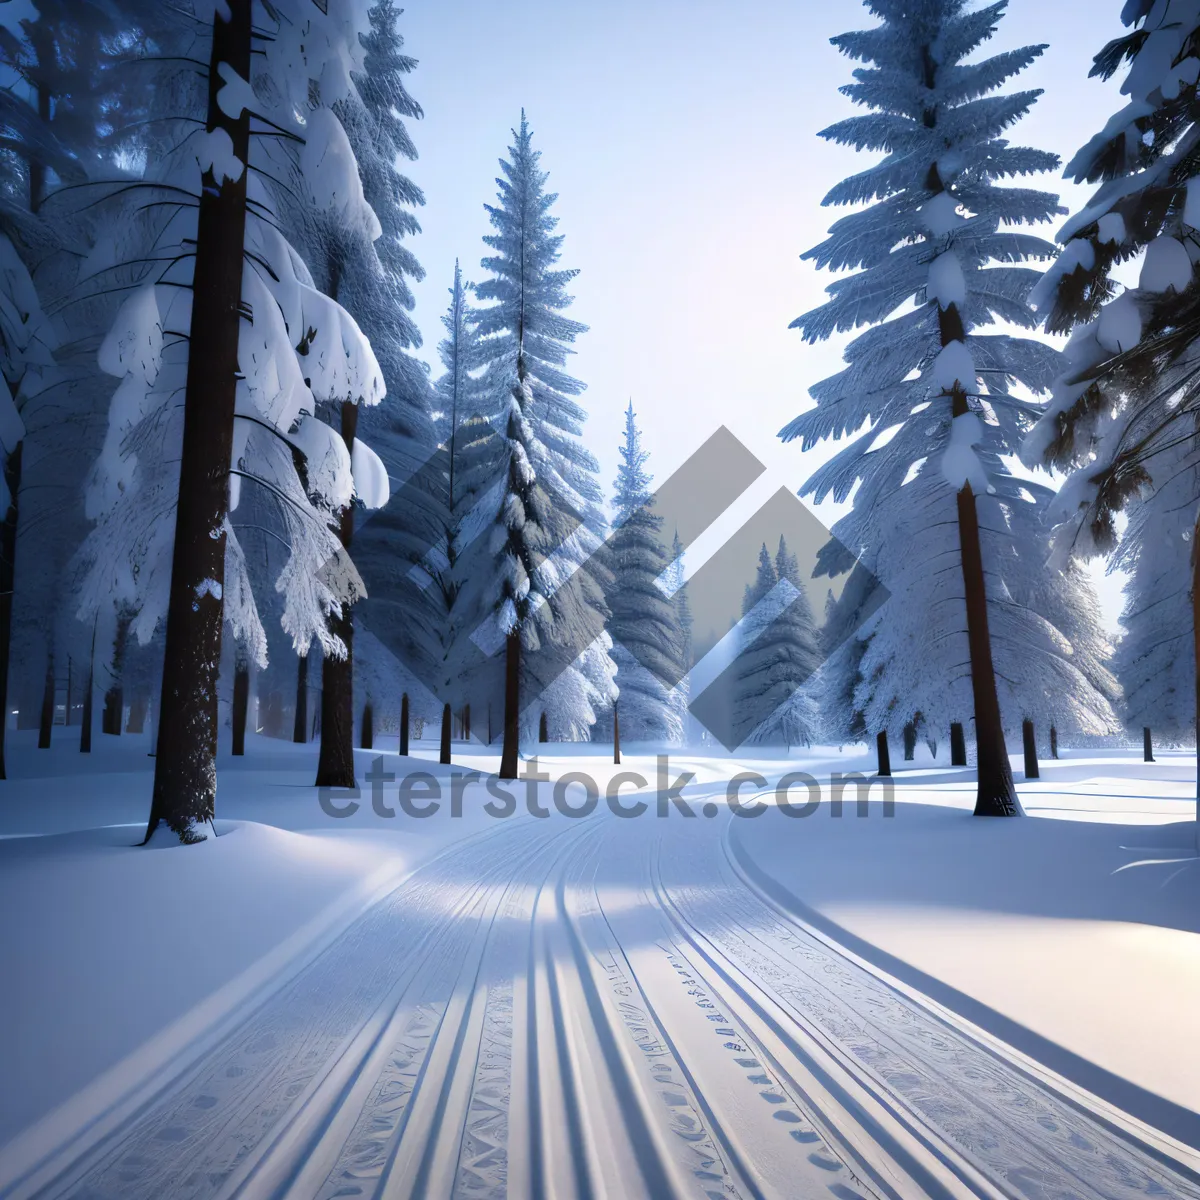 Picture of Winter Wonderland: Frosty Forest with Snowy Mountains